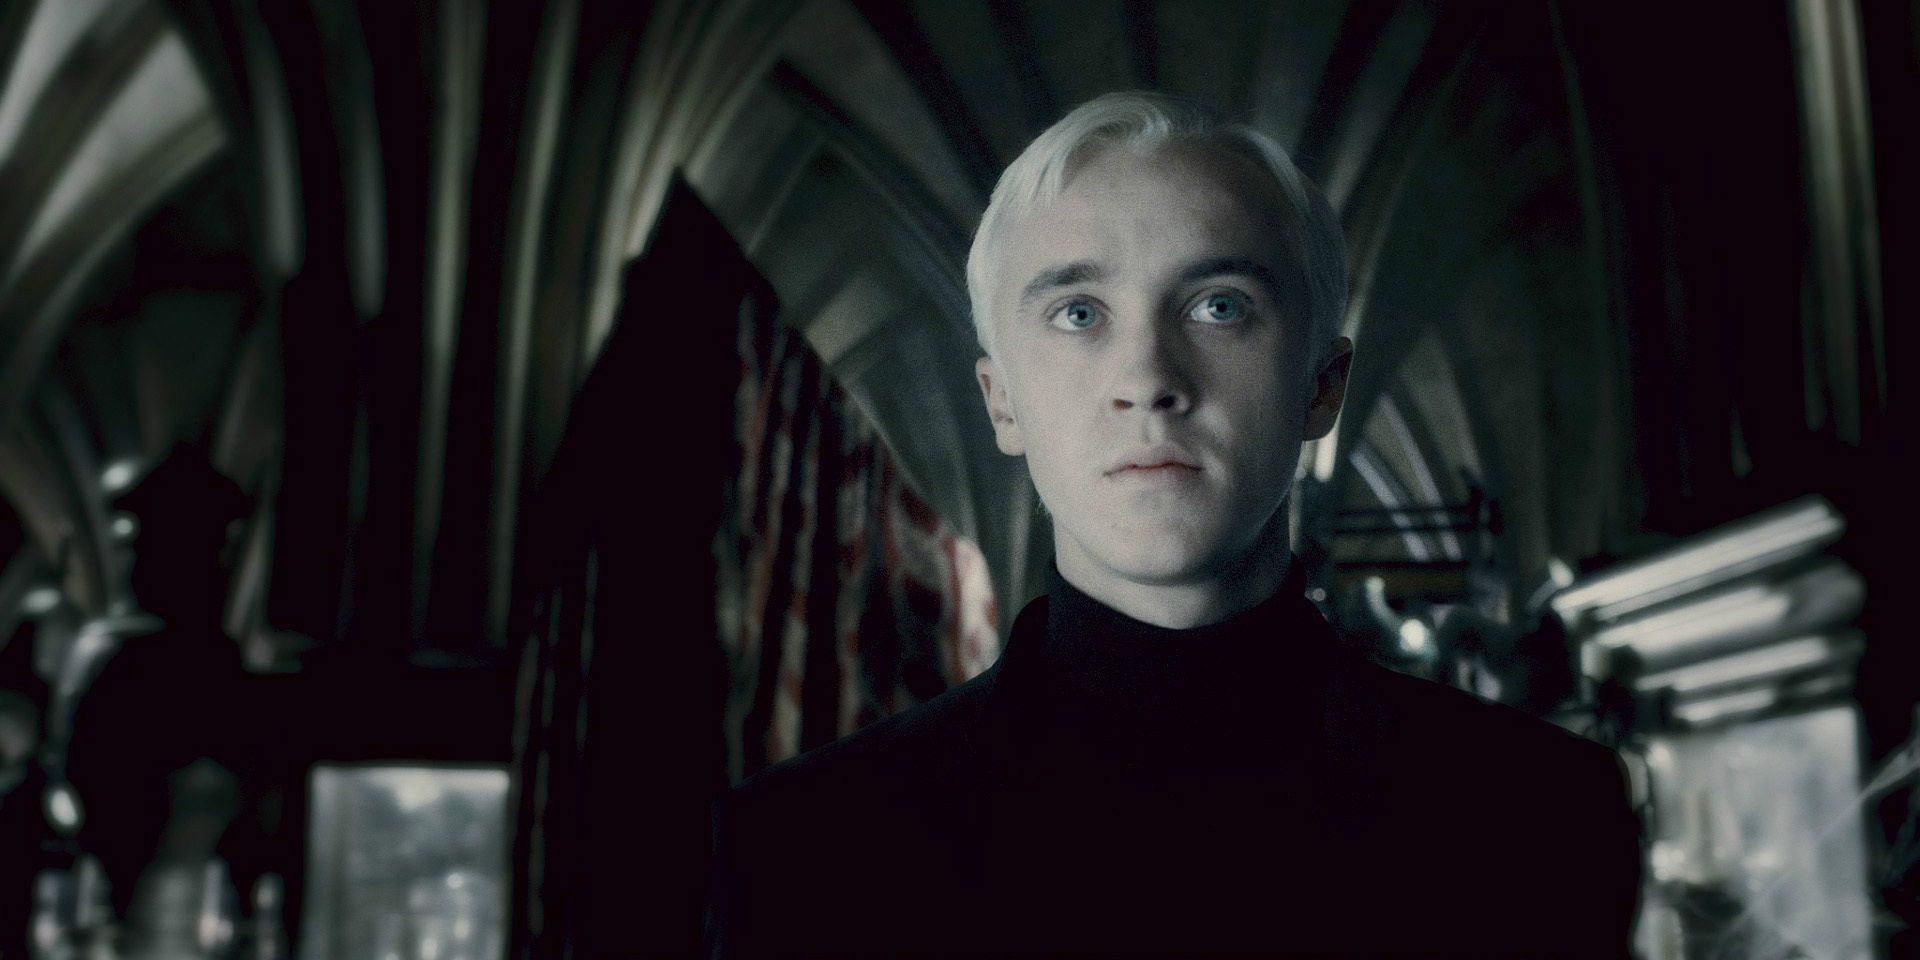 Tom Felton Wants to Reprise Role as Draco Malfoy